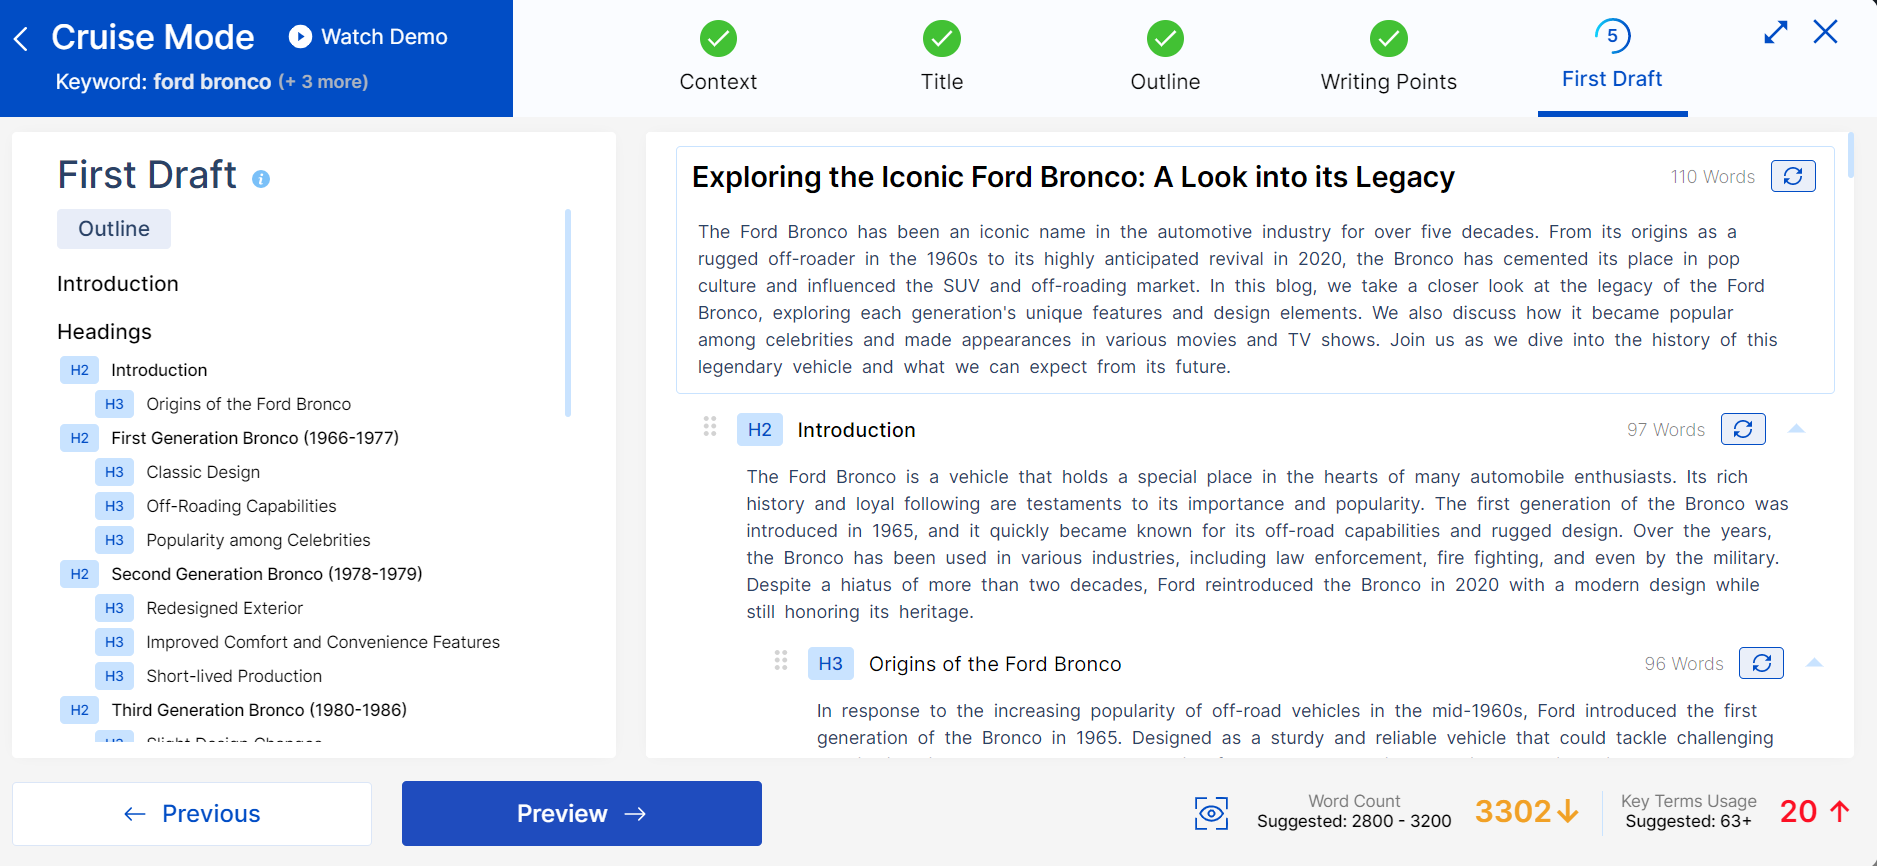 Scalenut's article about the Ford Bronco